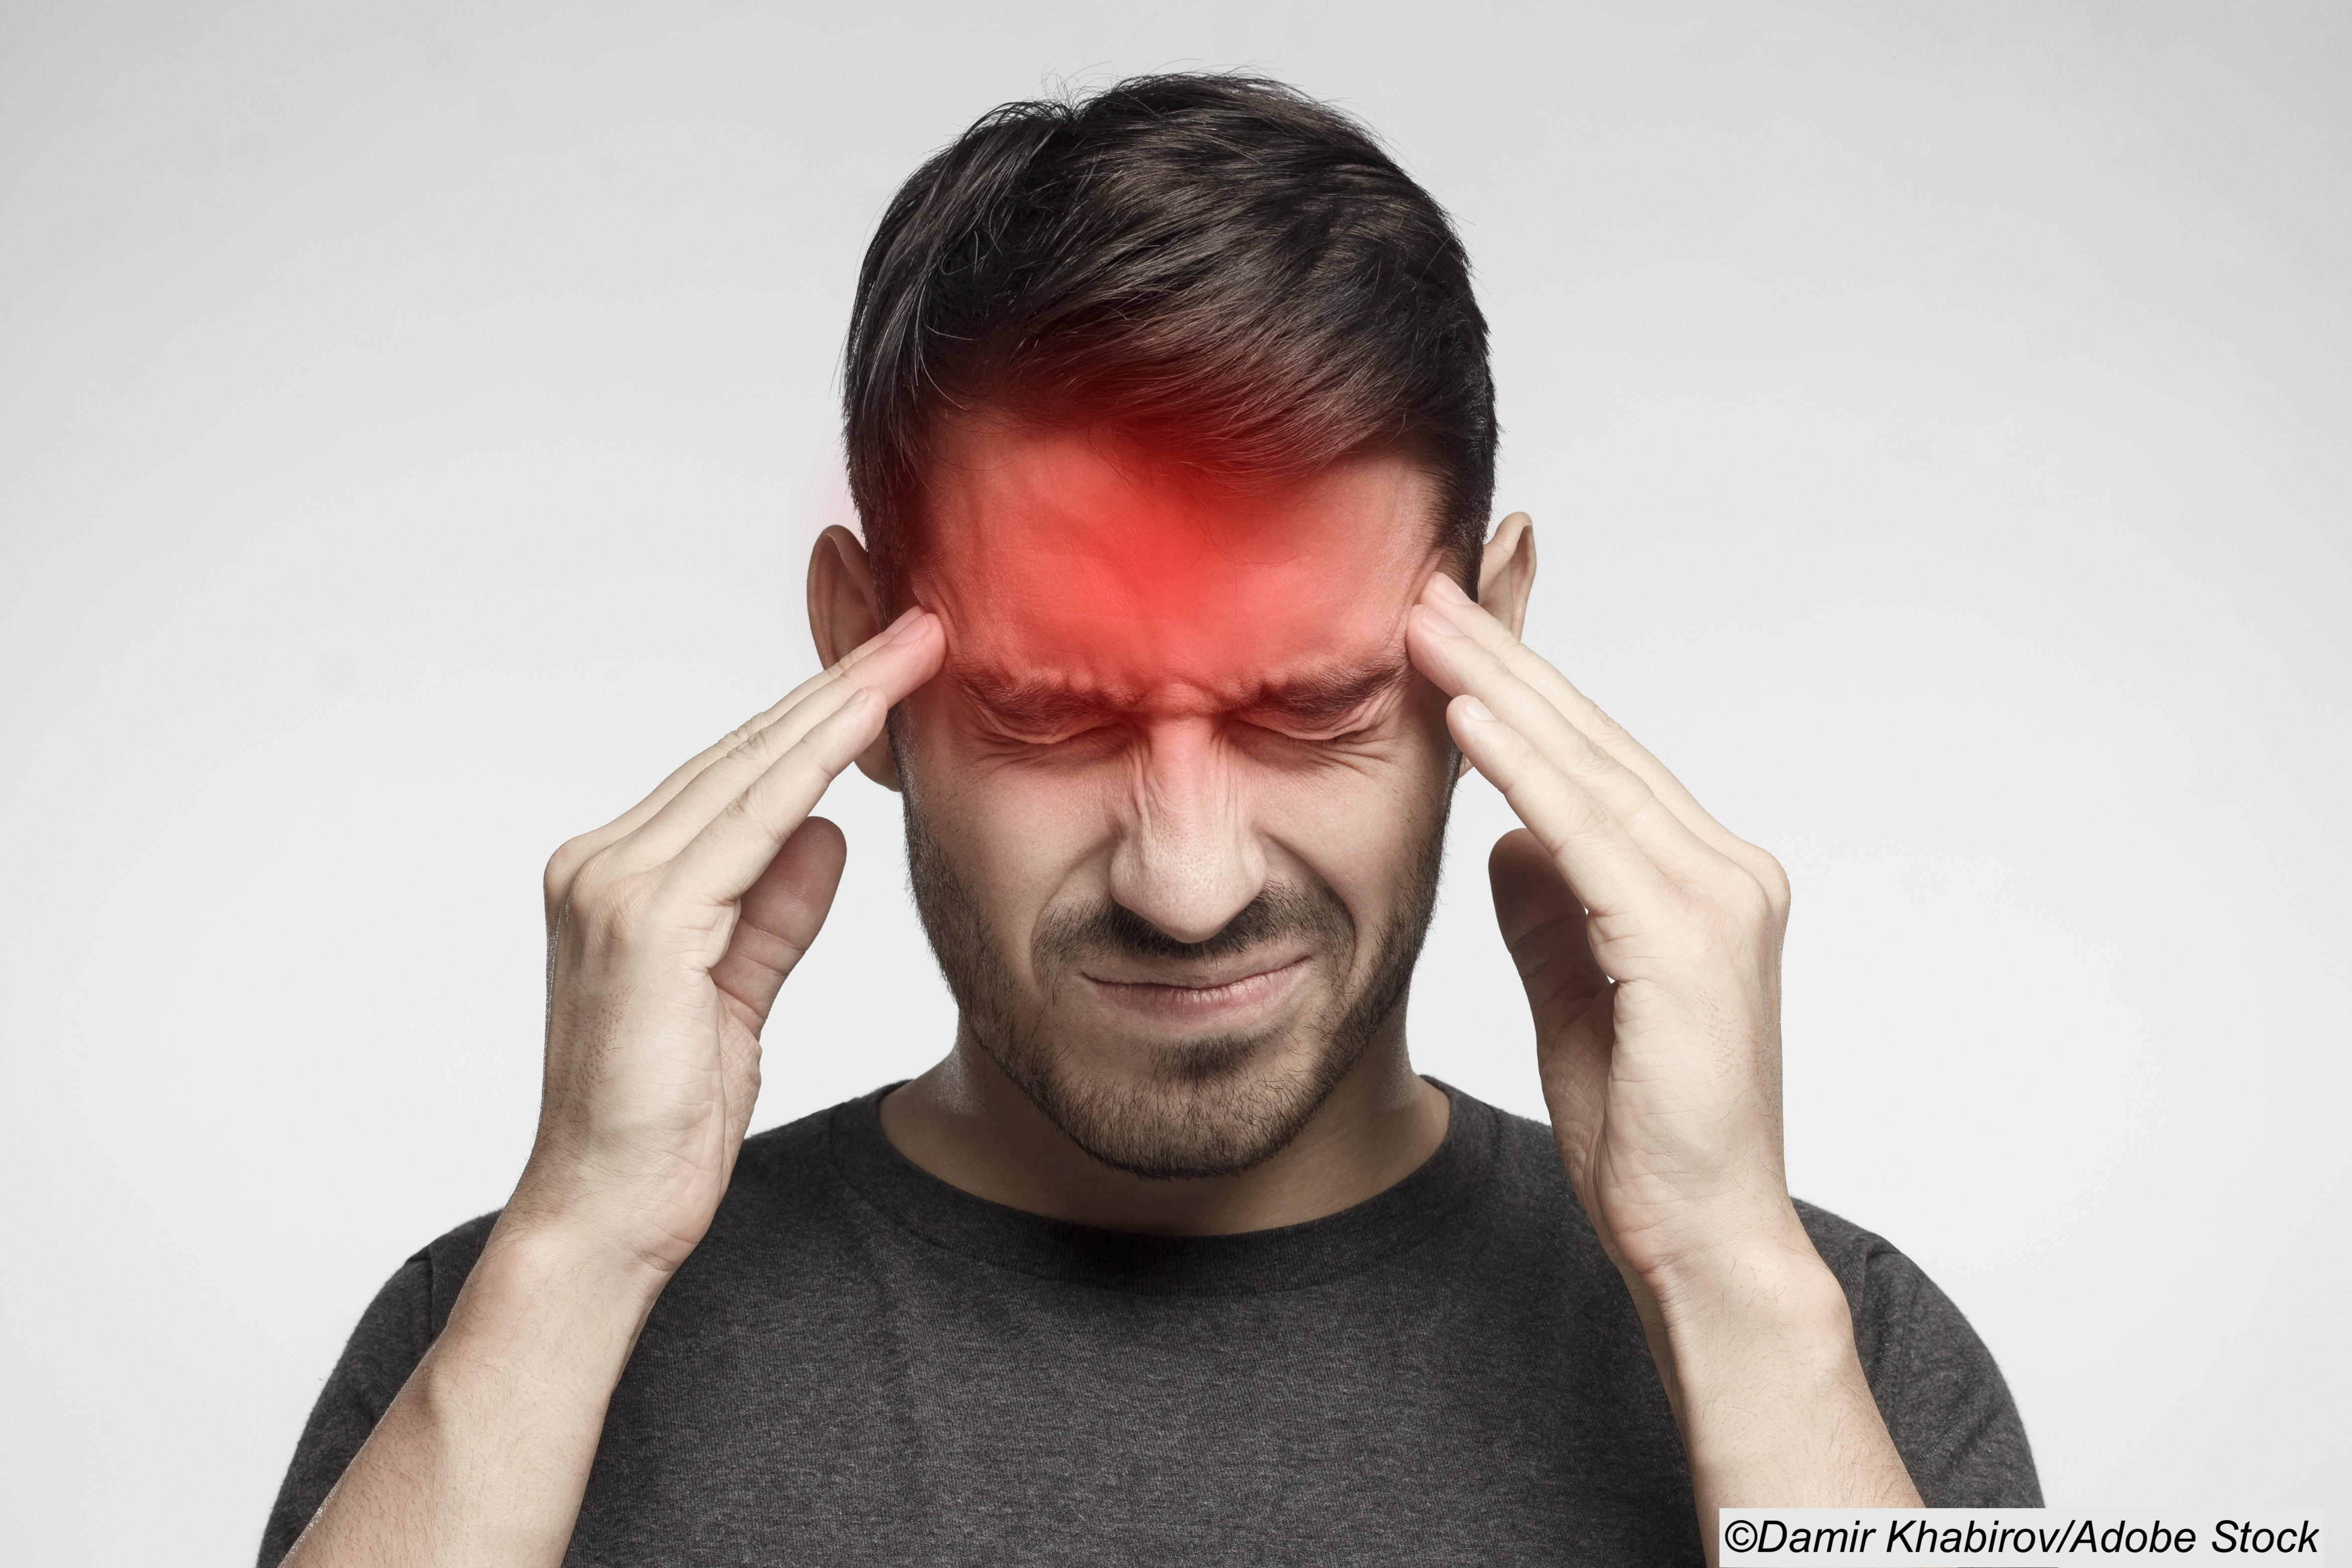 Erenumab Efficacy Similar in Migraine With or Without Aura